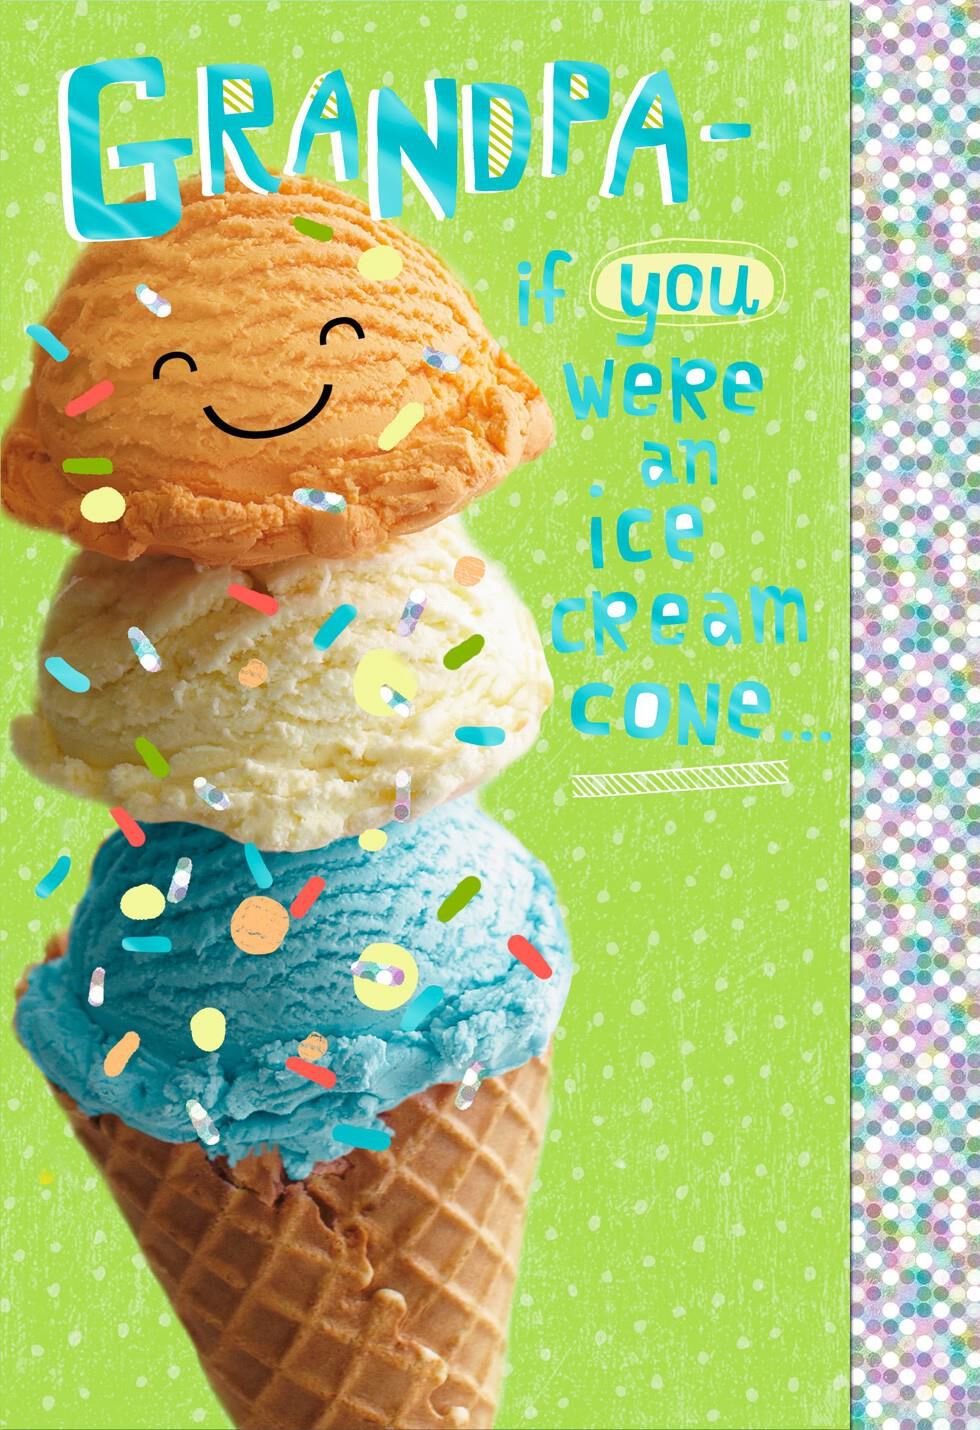 Triple-Scoop Ice Cream Cone Father's Day Card for Grandpa - Greeting